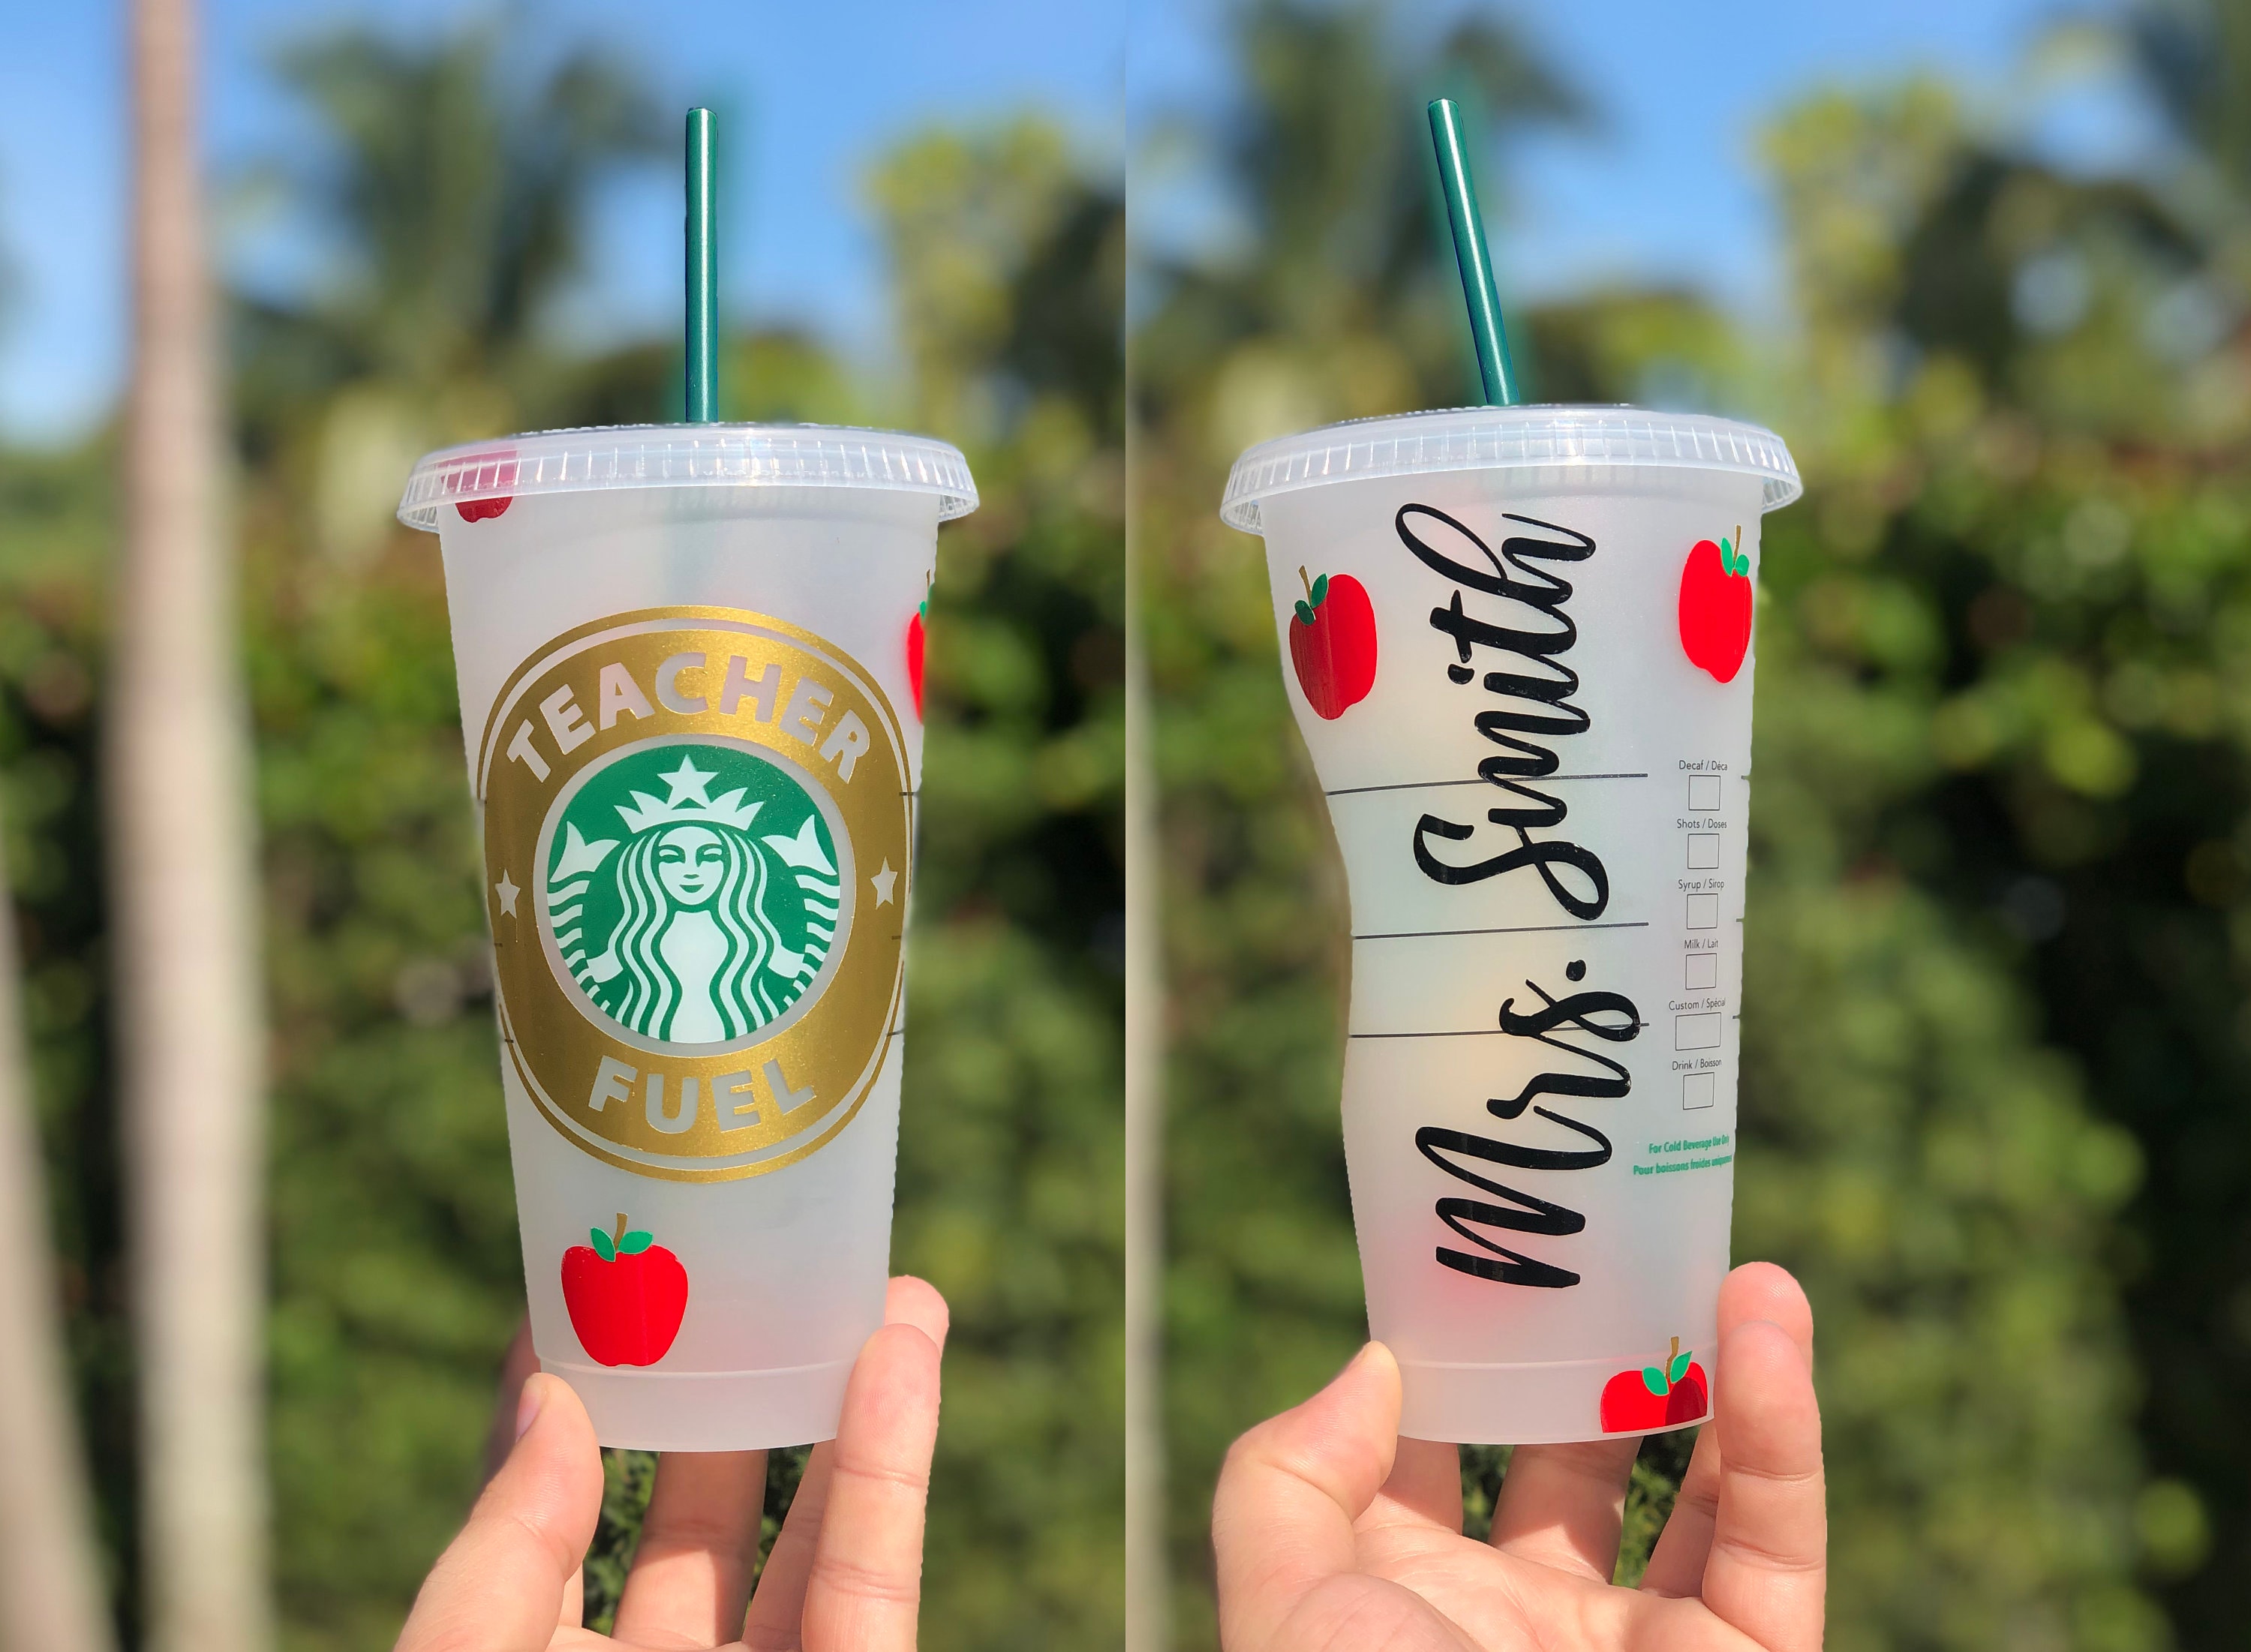 Starbucks Tumbler, Starbucks Cup, Personalized Starbucks Cup, Bridesmaid  Gift, Wedding Favor, Bachelorette Party Cups, Teacher Gift